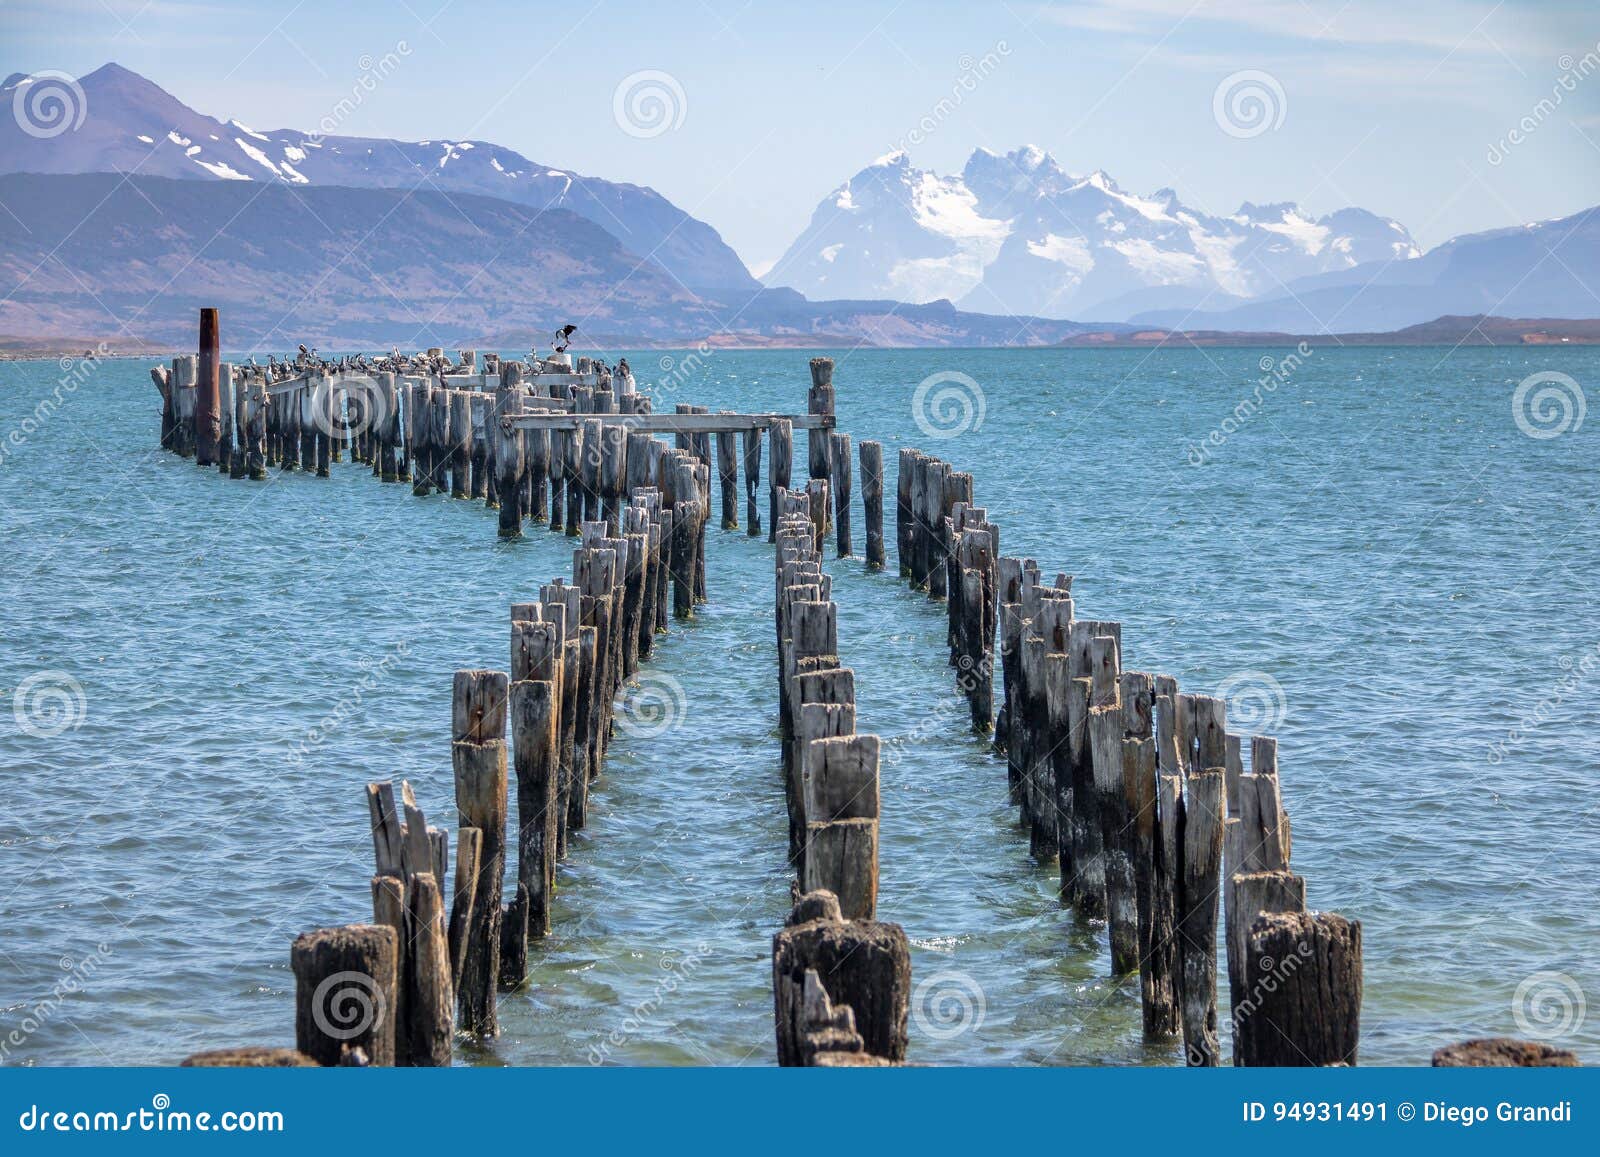 old dock in almirante montt gulf in patagonia - puerto natales, magallanes region, chile